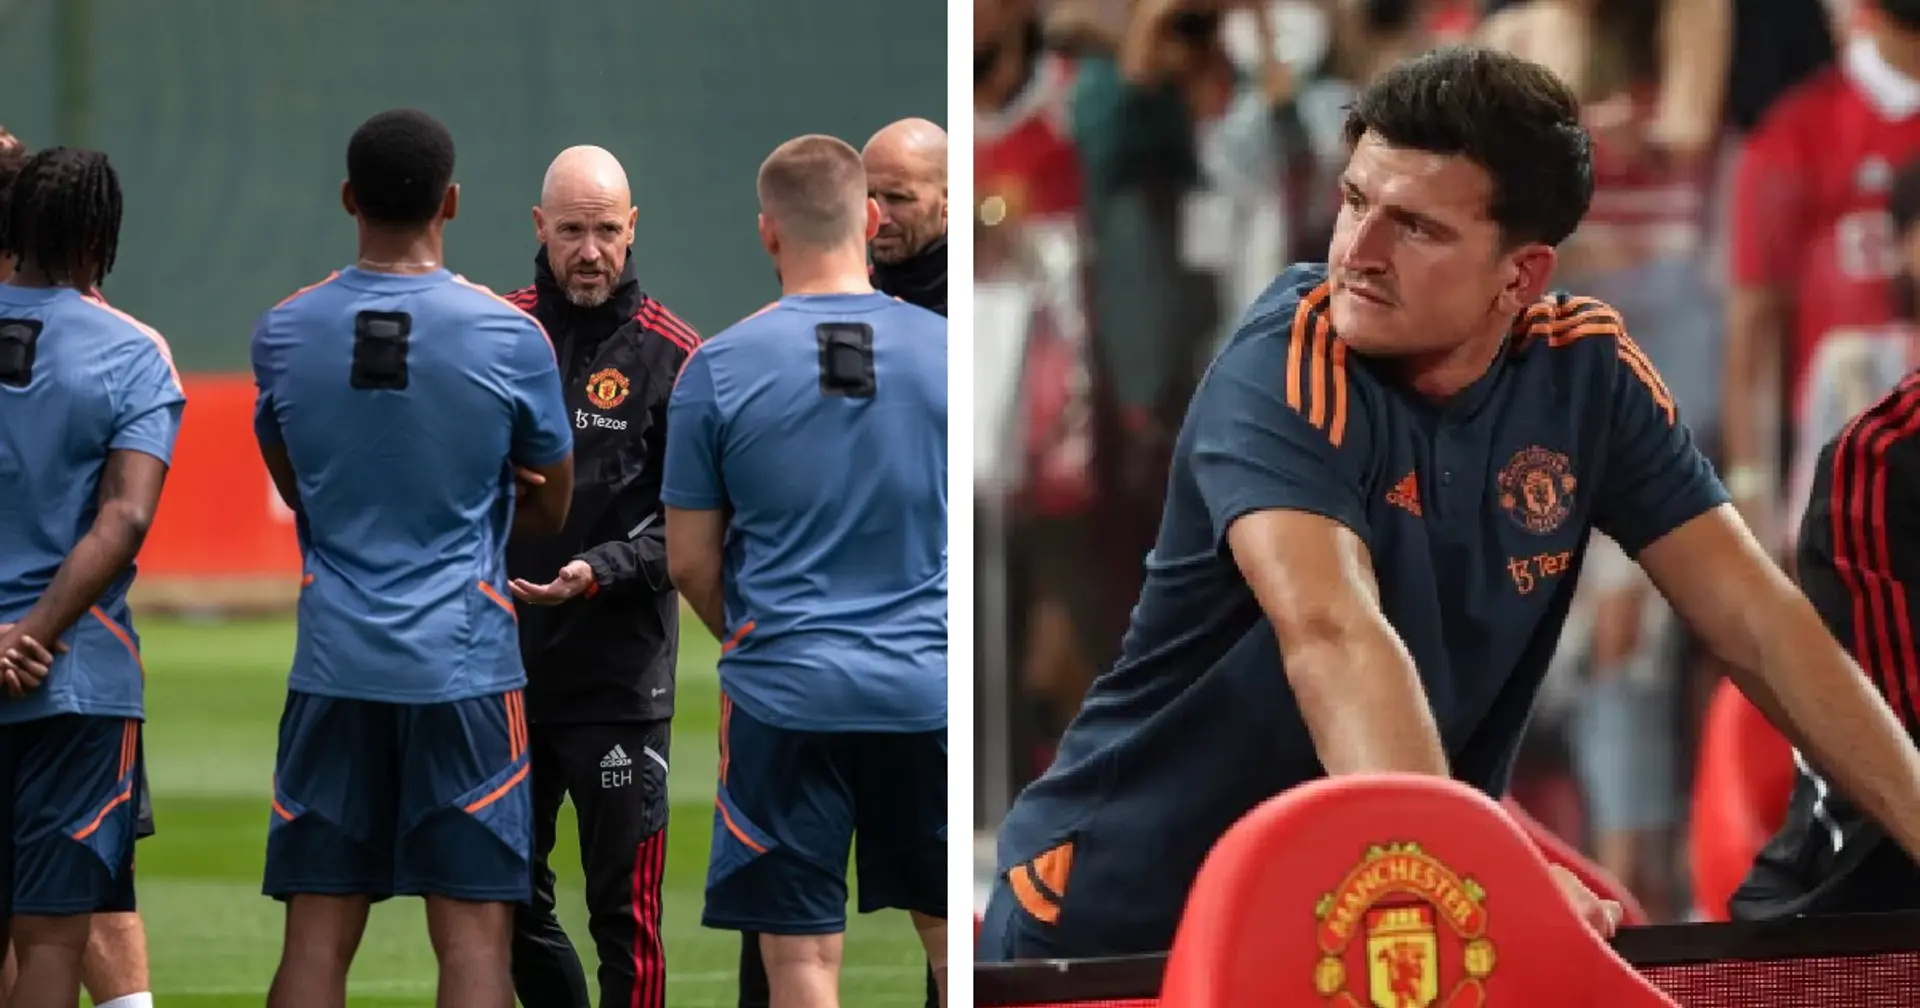 Ten Hag reveals United player who begged to start against City - not Maguire